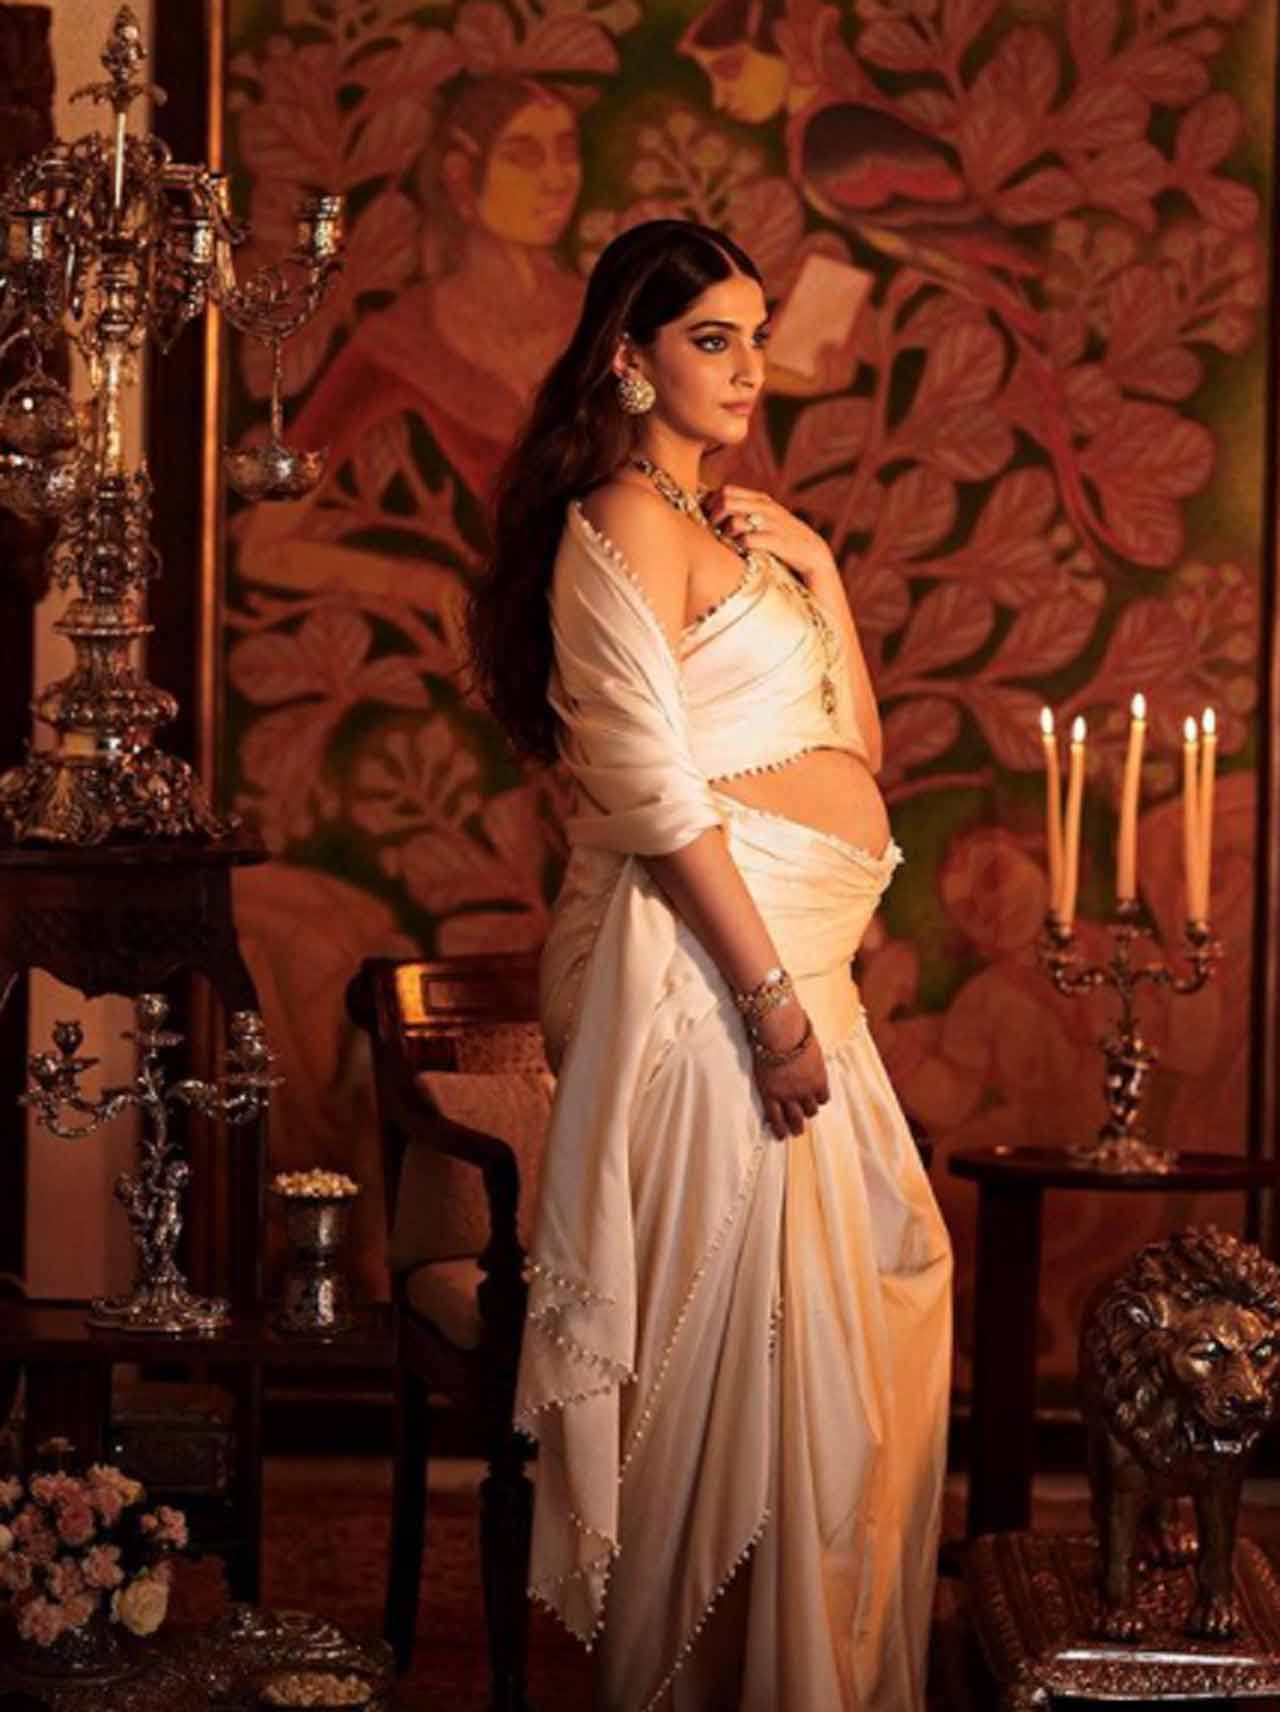 Sonam looked straight out of a painting, flaunting her baby bump in an ivory-toned draped skirt saree, paired with a tube blouse. She complimented her delicate outfit with heavy gold jewellery and finished the dramatic look with smokey eyes and naturally-styled long hair.